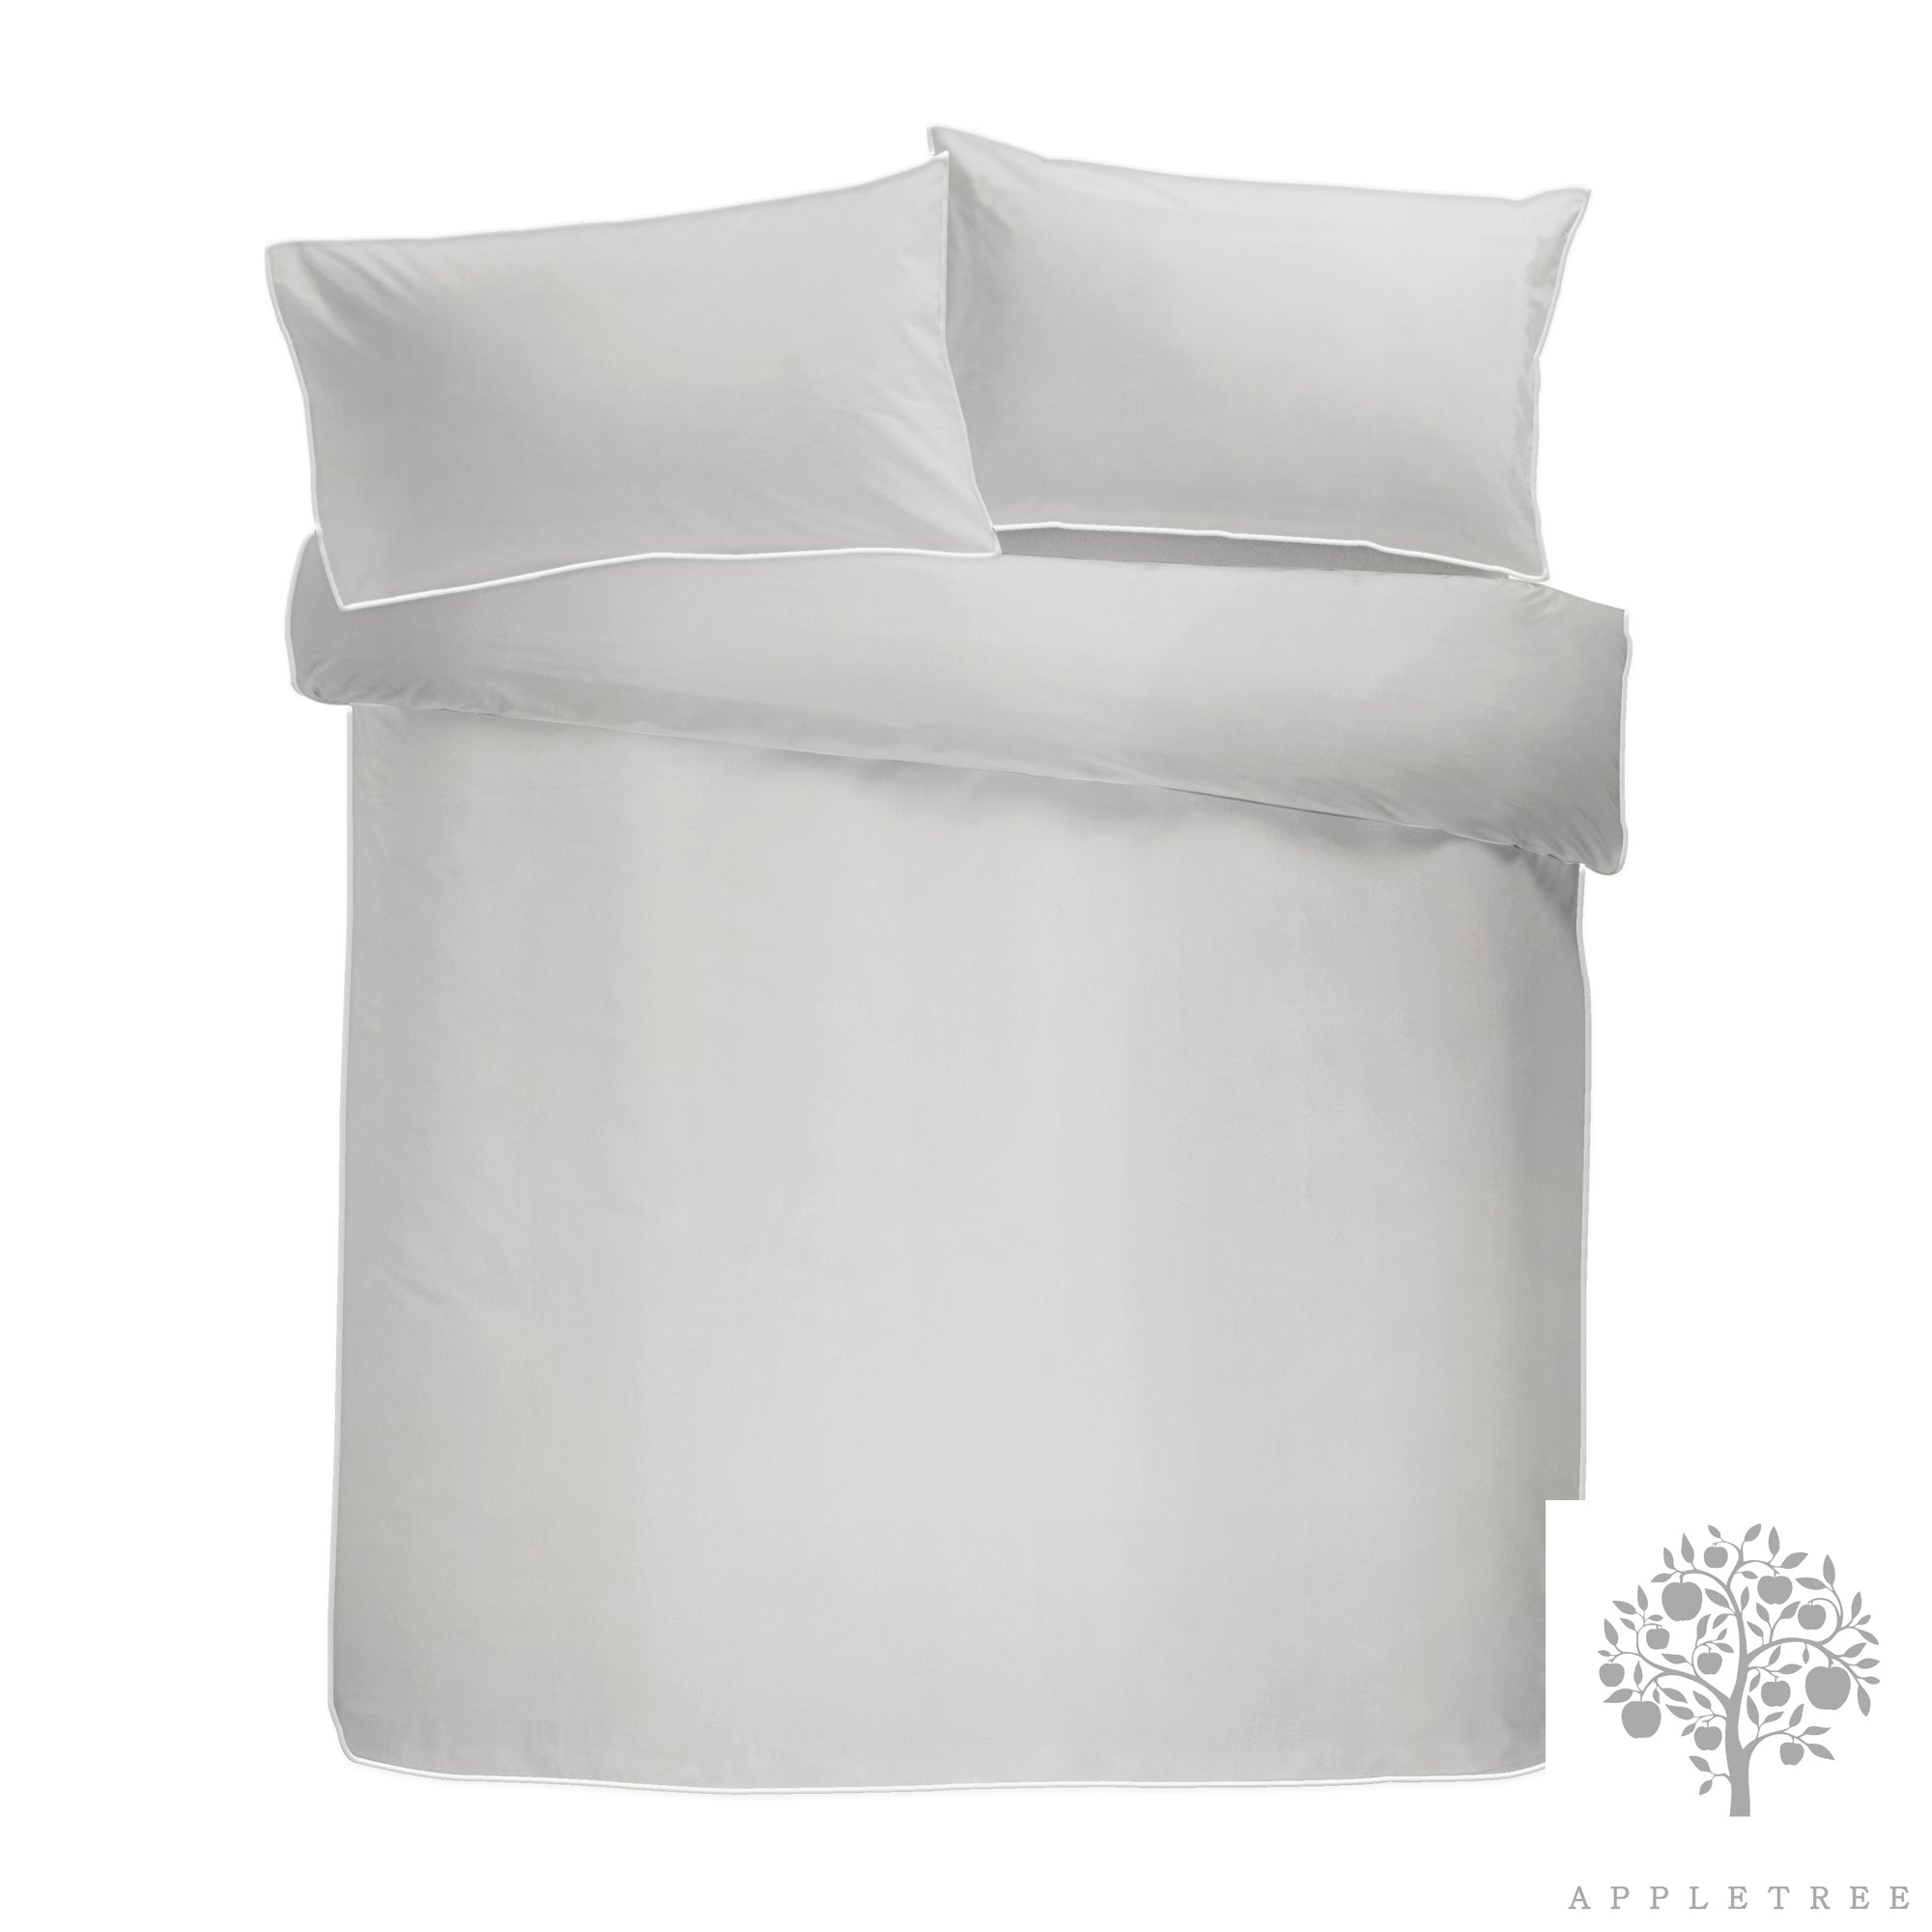 Plain Dye - 200TC 100% Cotton Duvet Set - Silver with White Contrast Piping by Appletree Boutique